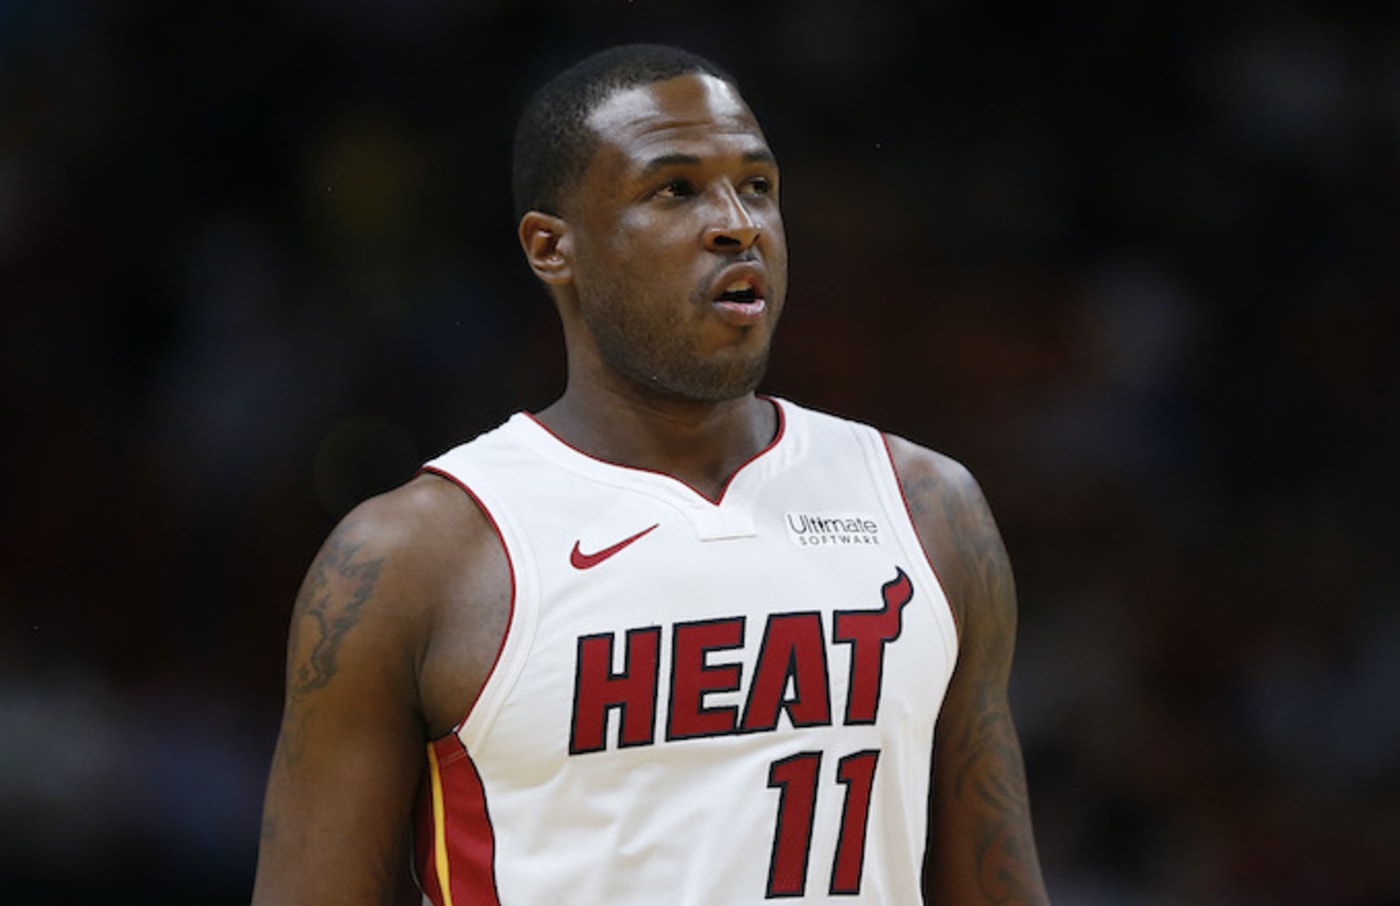 Dion Waiters of the Miami Heat looks on against the Houston Rockets.